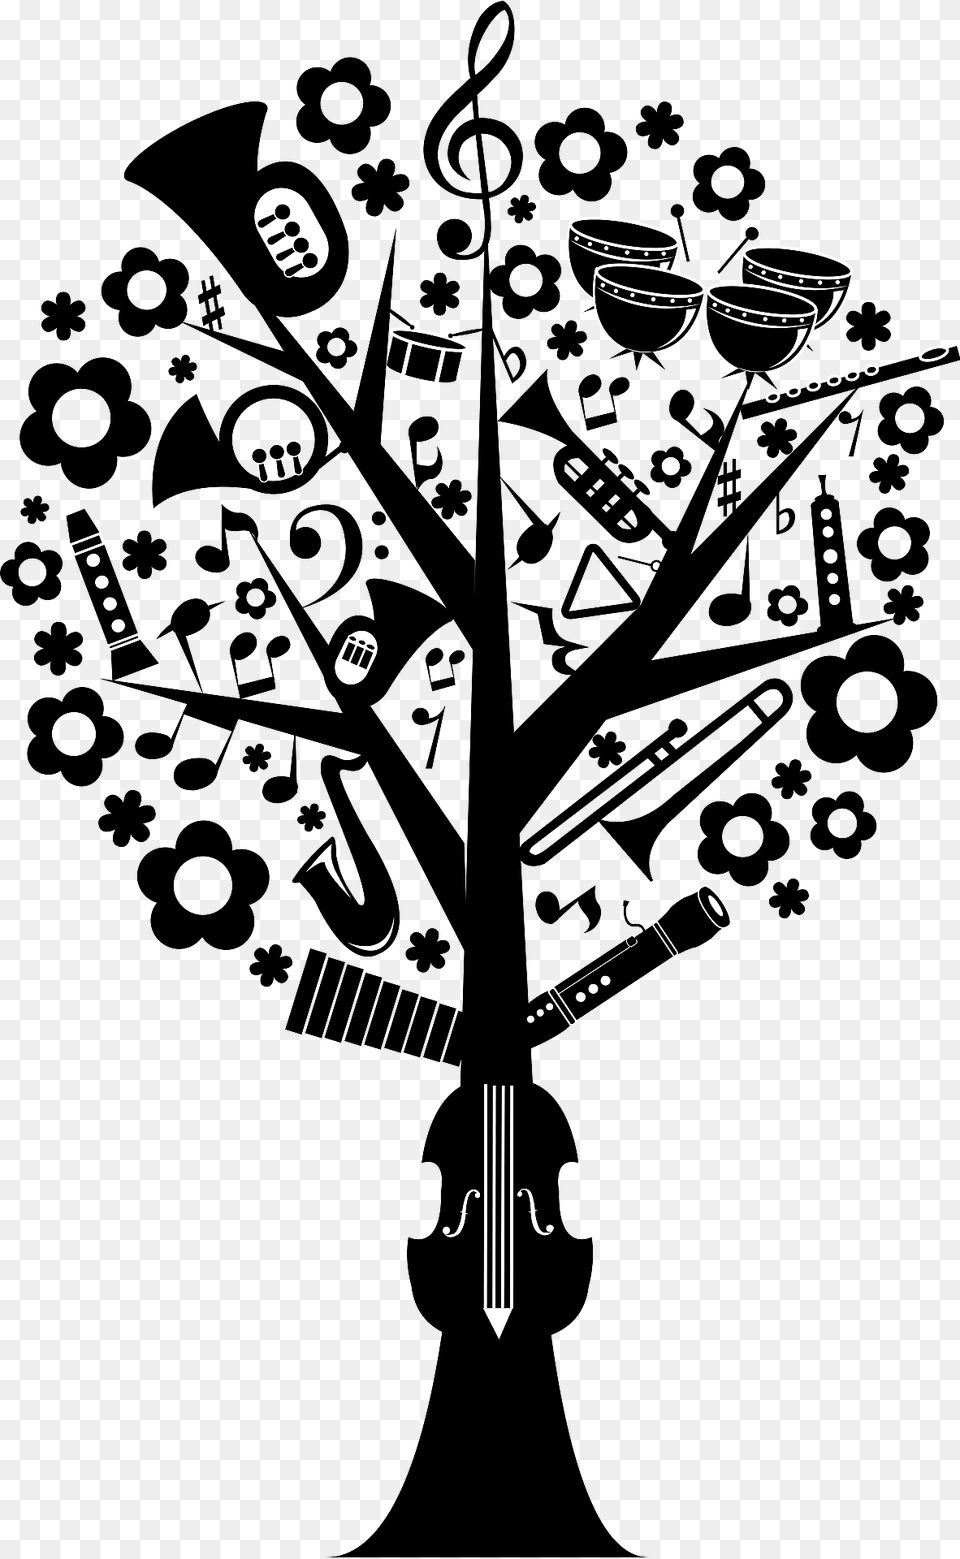 Music Tree Silhouette Clipart, Cross, Symbol, Art, Graphics Png Image